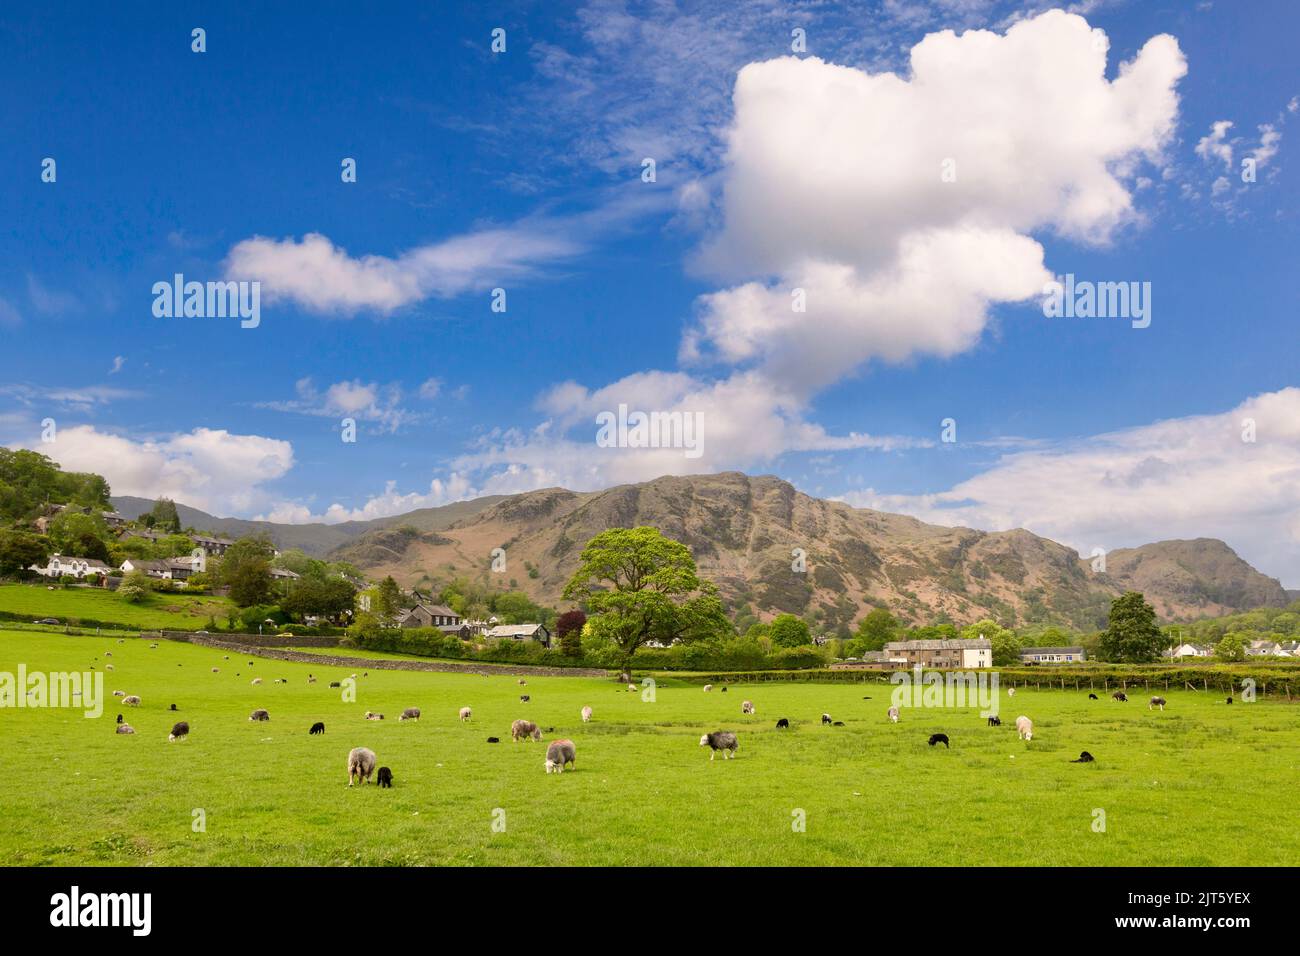 The village of Coniston, Cumbria, UK in its setting below the Lake District Fells, with sheep and pasture in the foreground. Stock Photo